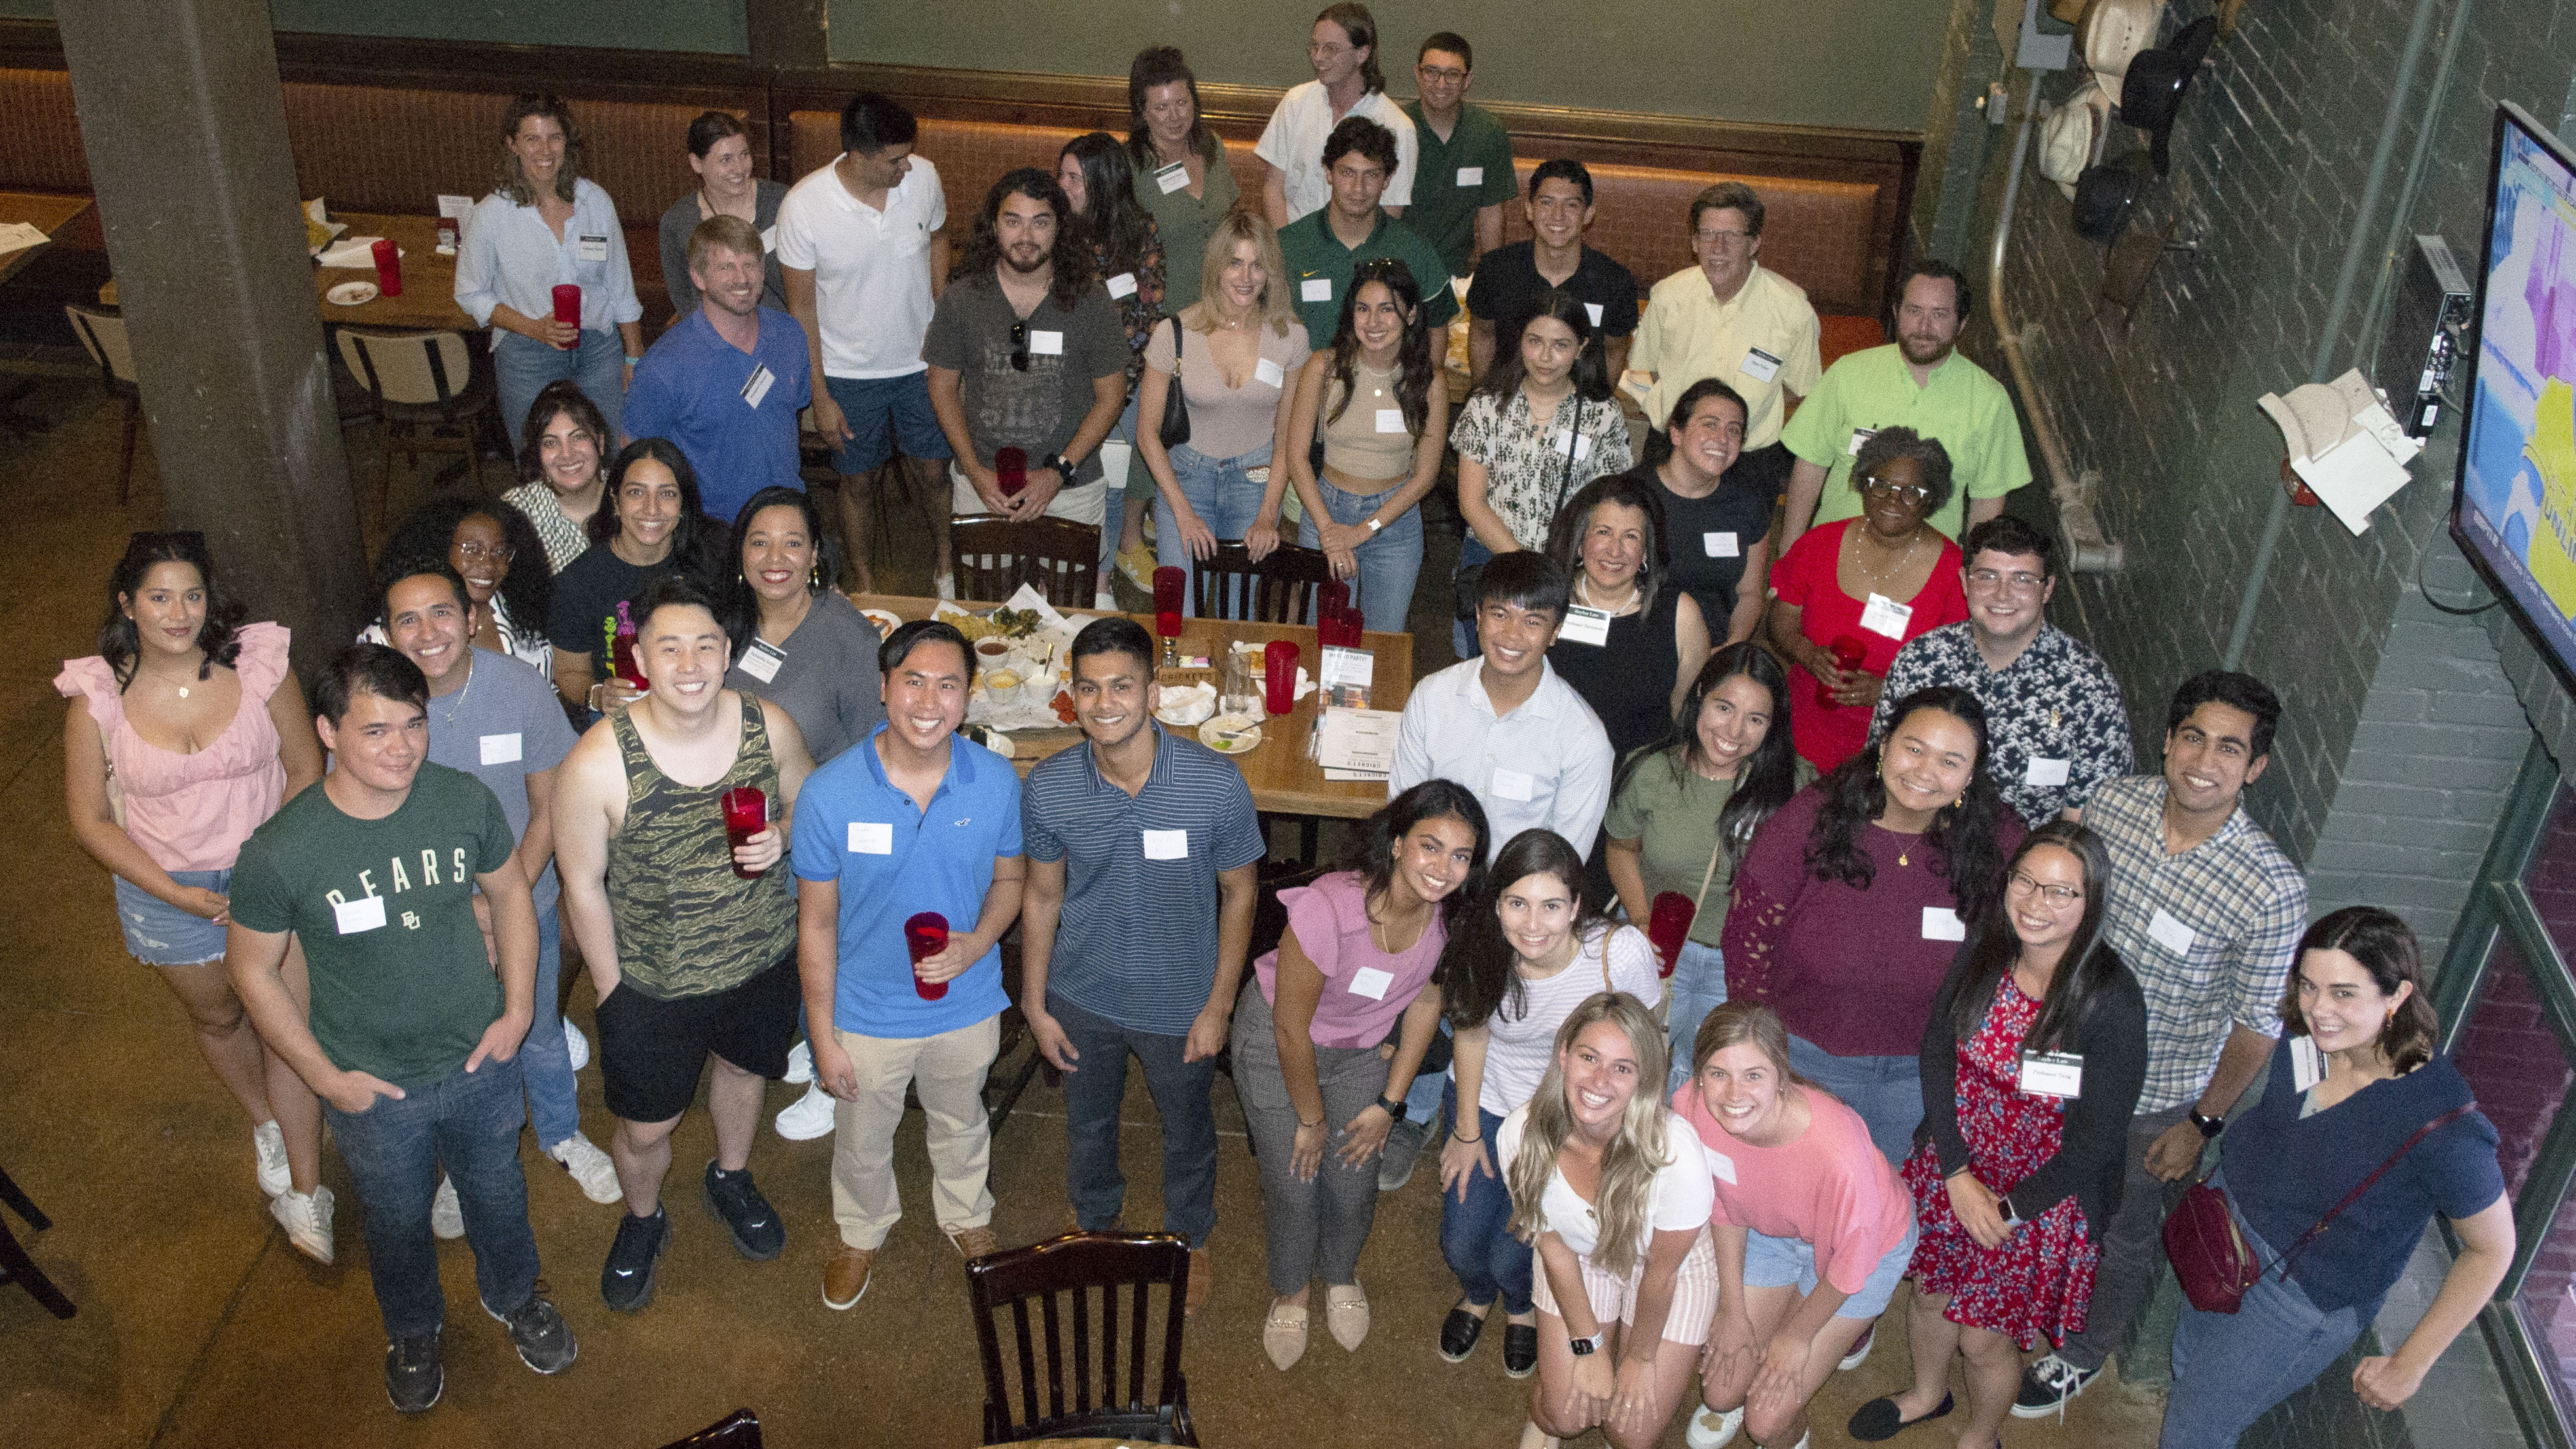 Dozens of students pose at the Diversity in Law welcome dinner